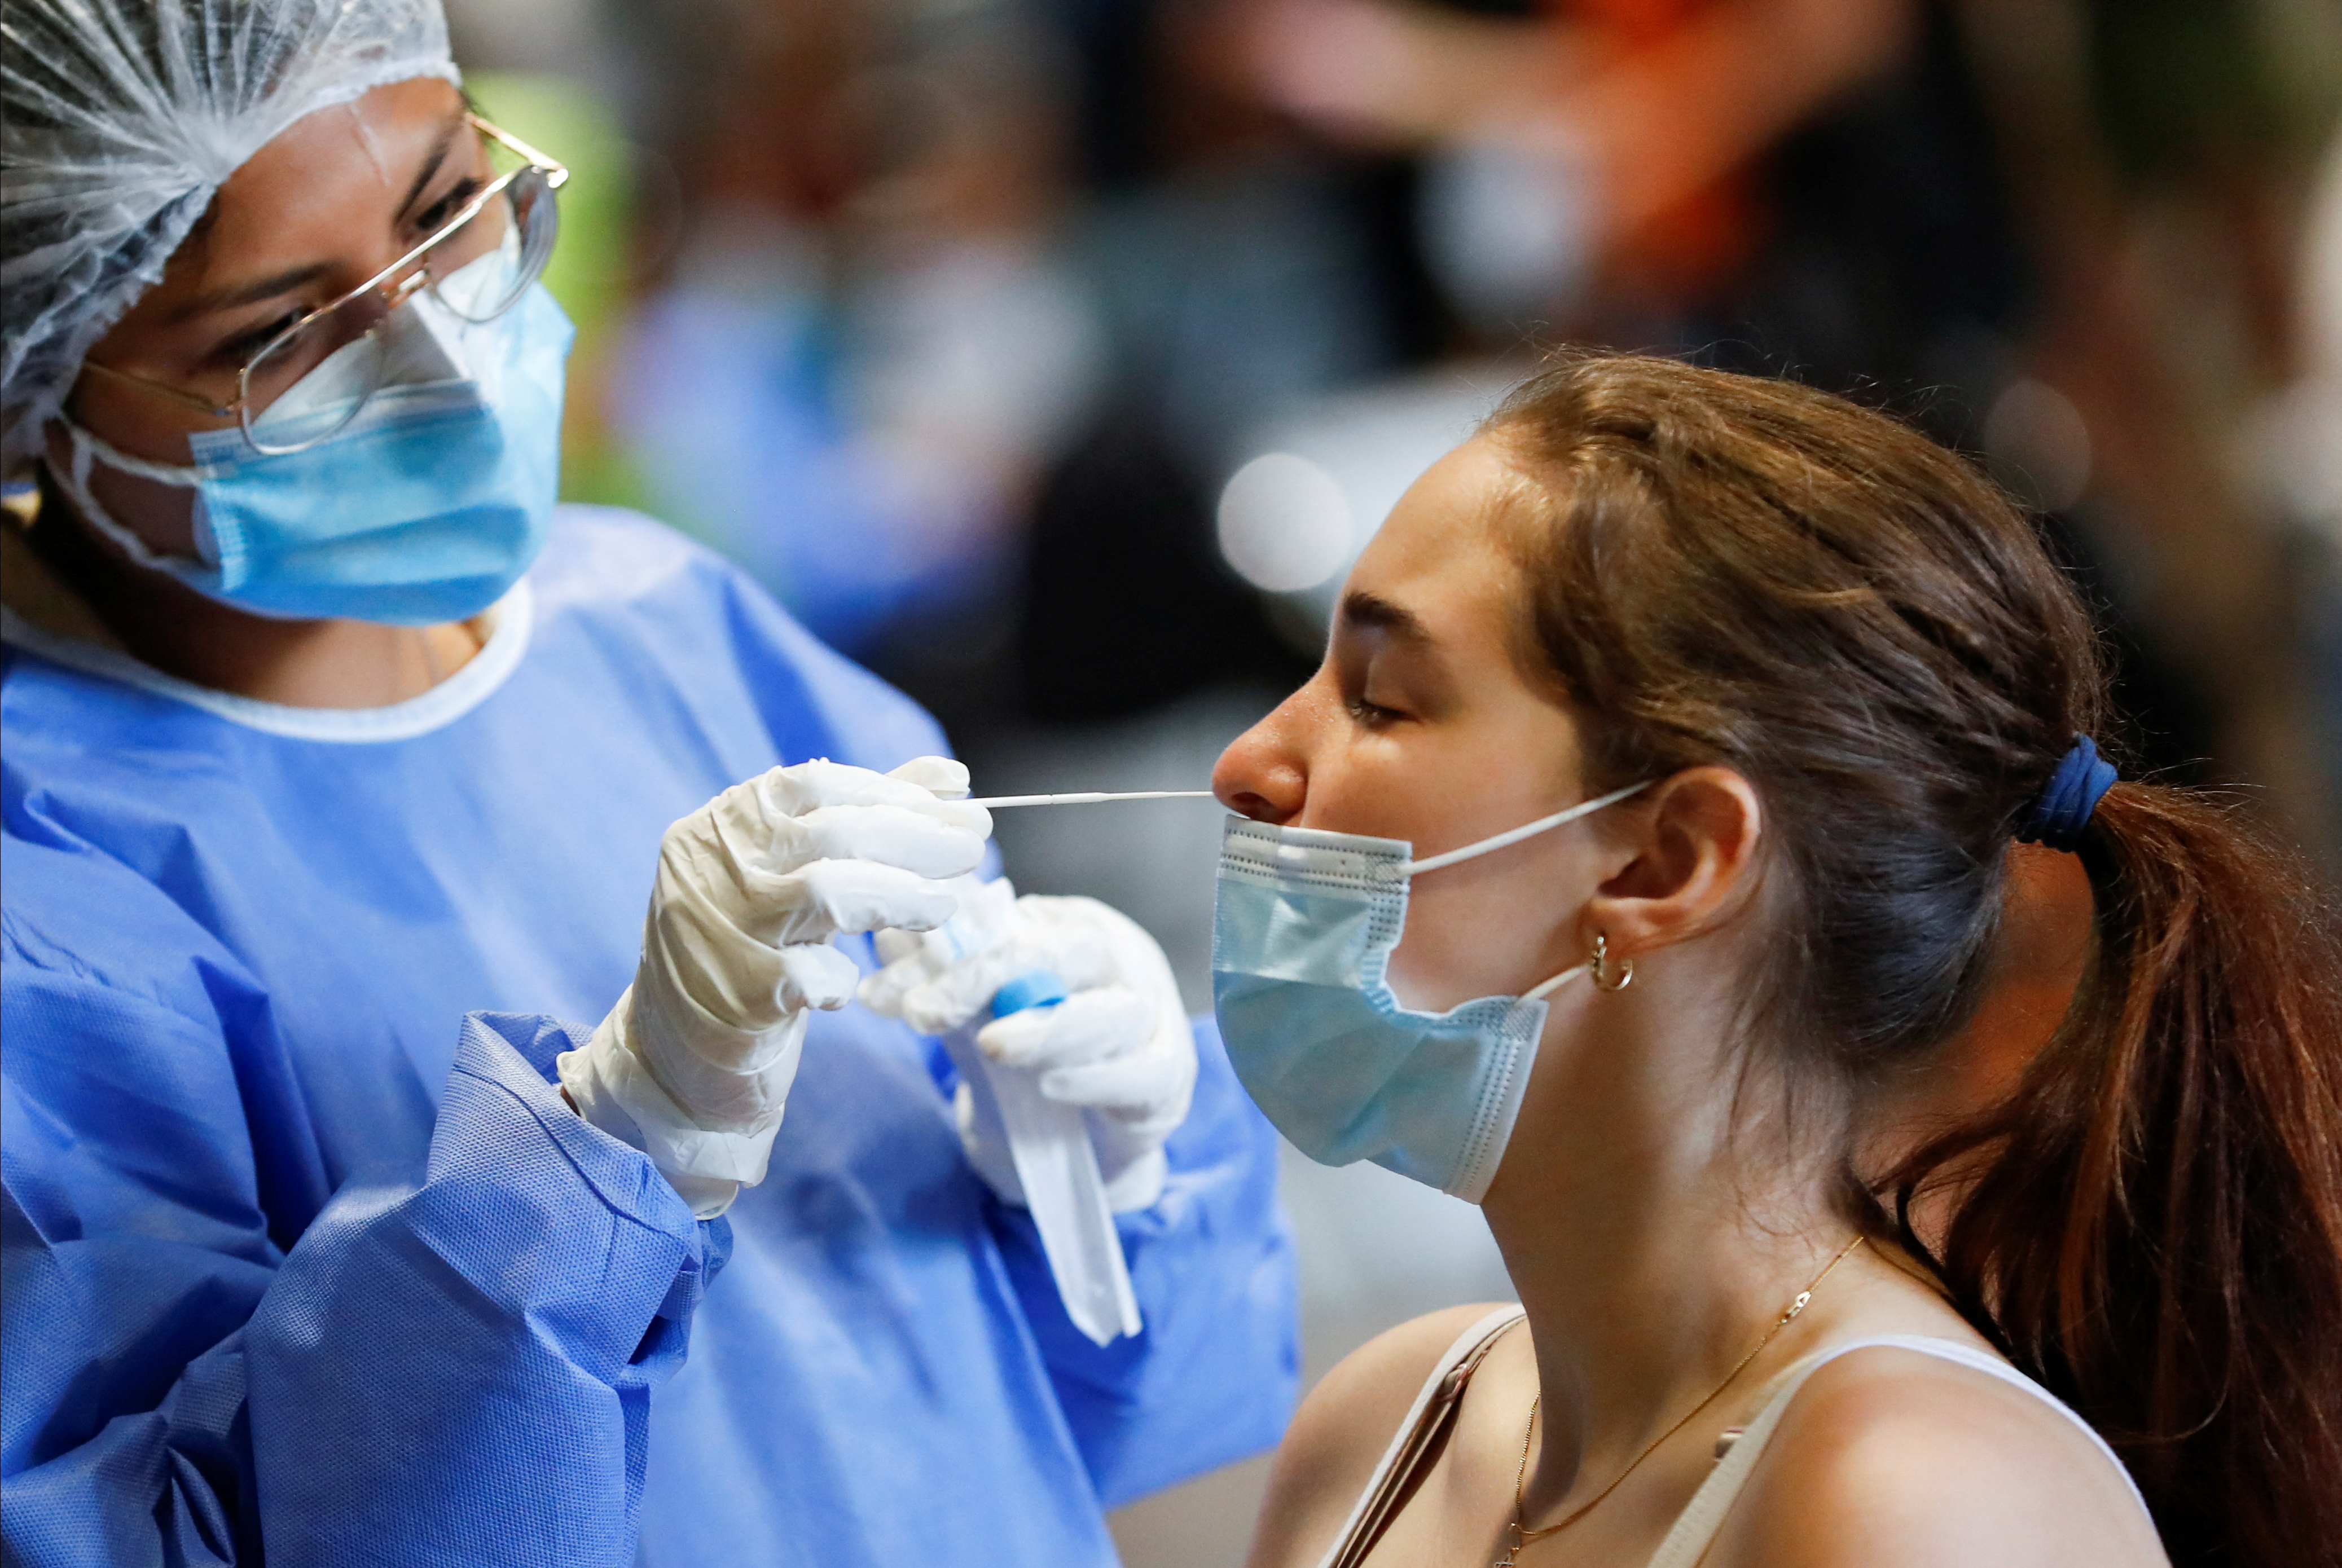 A healthcare worker takes a swab sample from a woman to be tested for the coronavirus disease (COVID-19), at La Rural, in Buenos Aires, Argentina December 23, 2021. Picture taken December 23, 2021. REUTERS/Agustin Marcarian